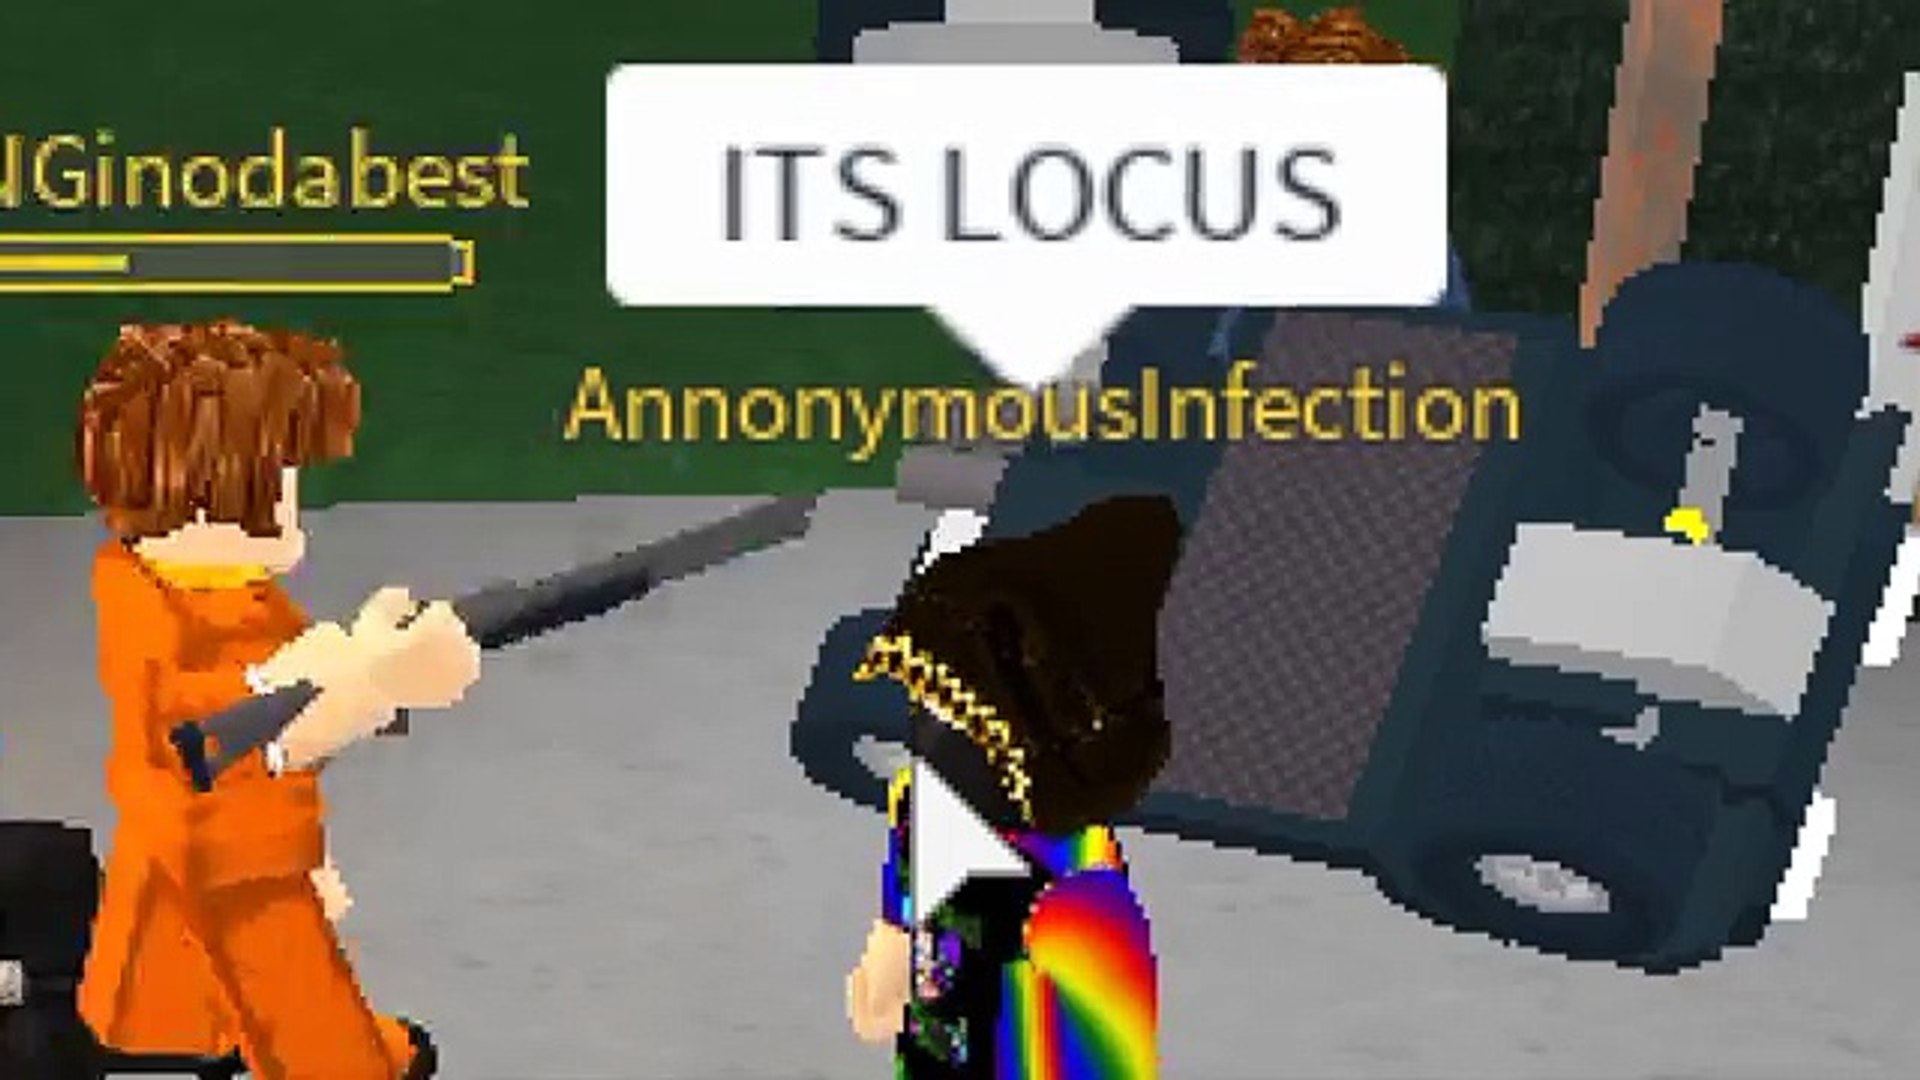 what game on roblox does locus play